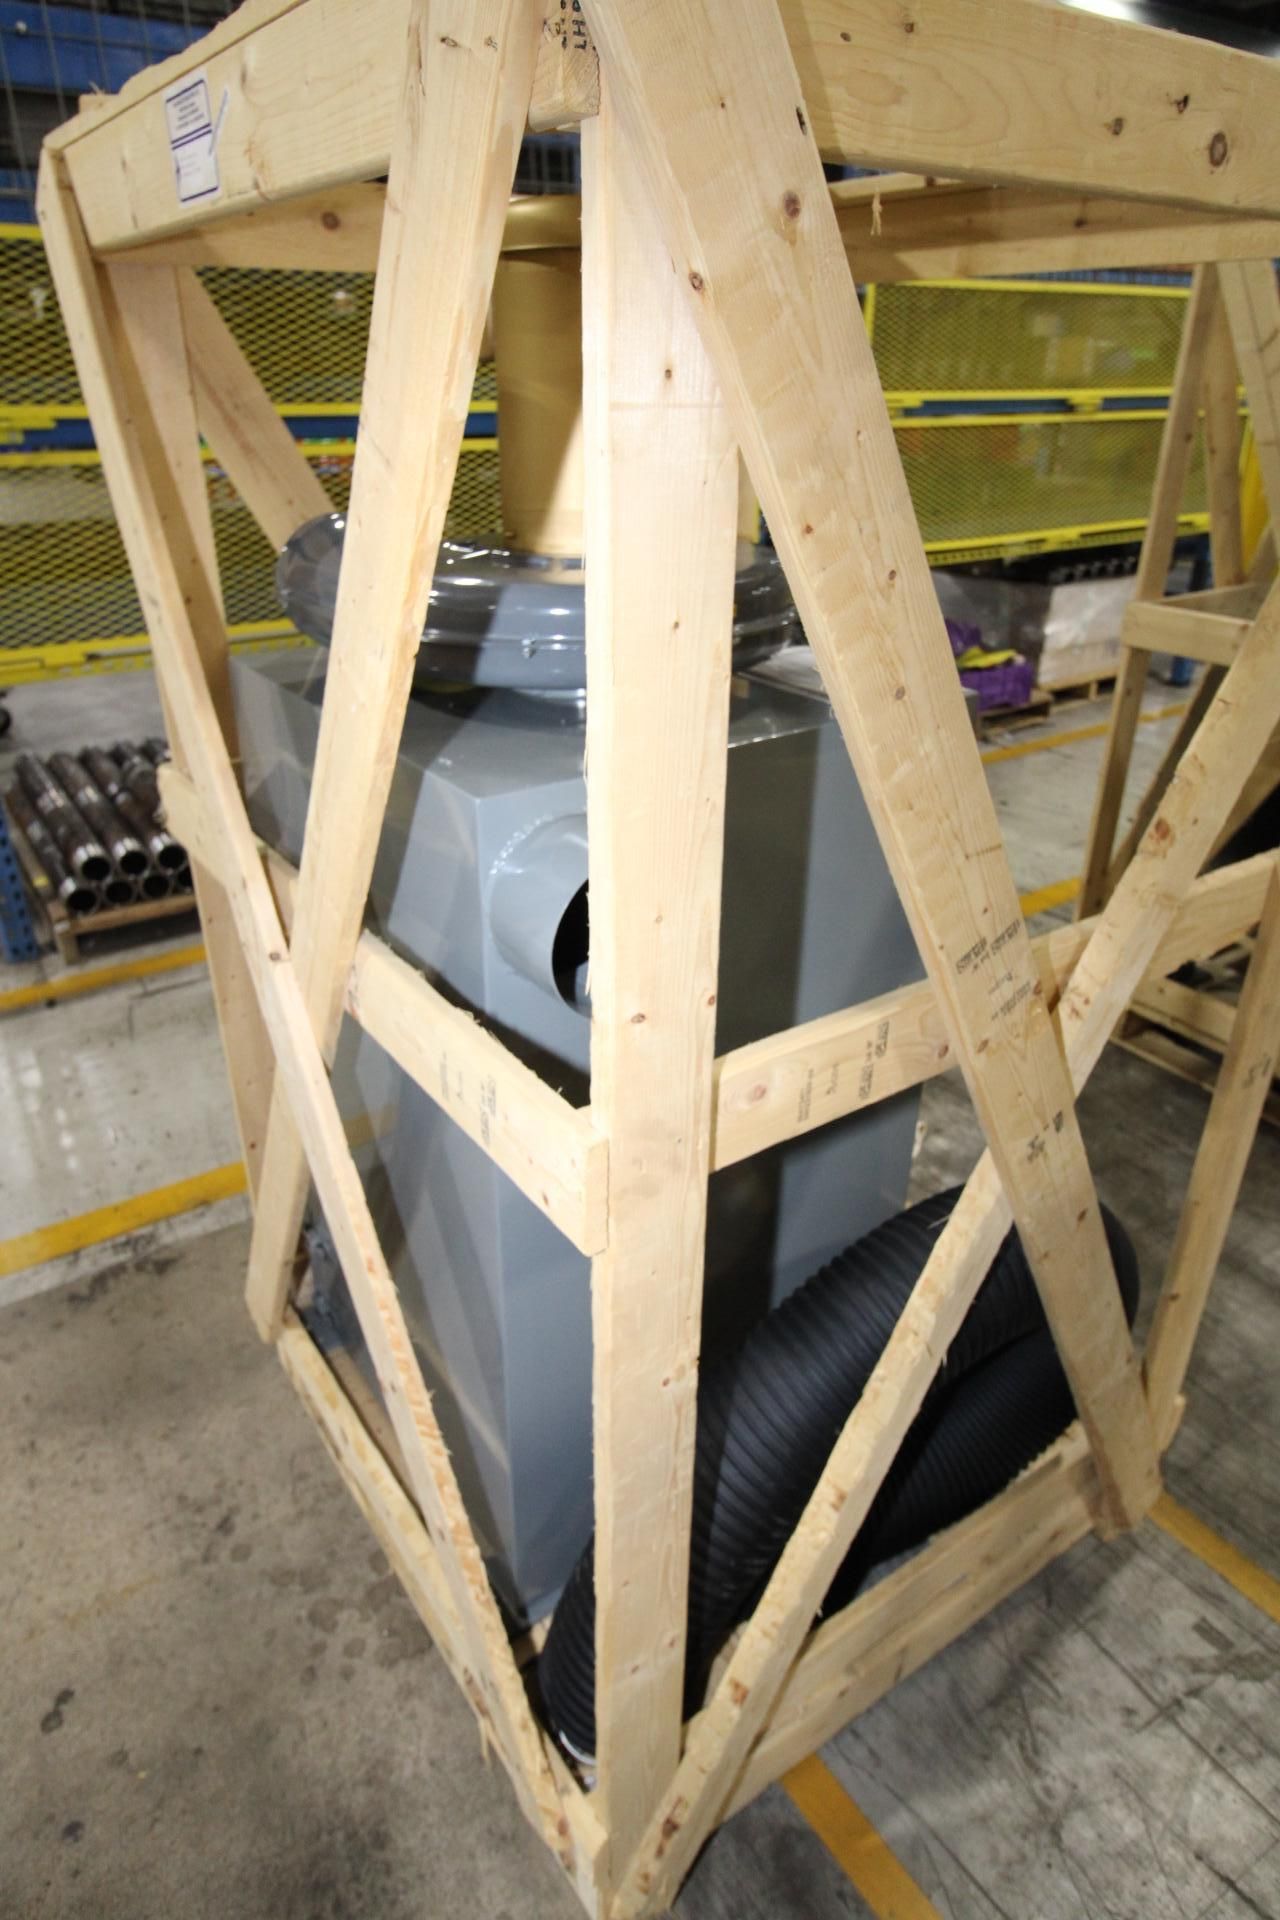 INDUSTRIAL SANDERS W/ DUST COLLECTOR, KALAMAZOO S8D, 8” x 60”, 7.5 HP, w/ dust collection system, - Image 8 of 8